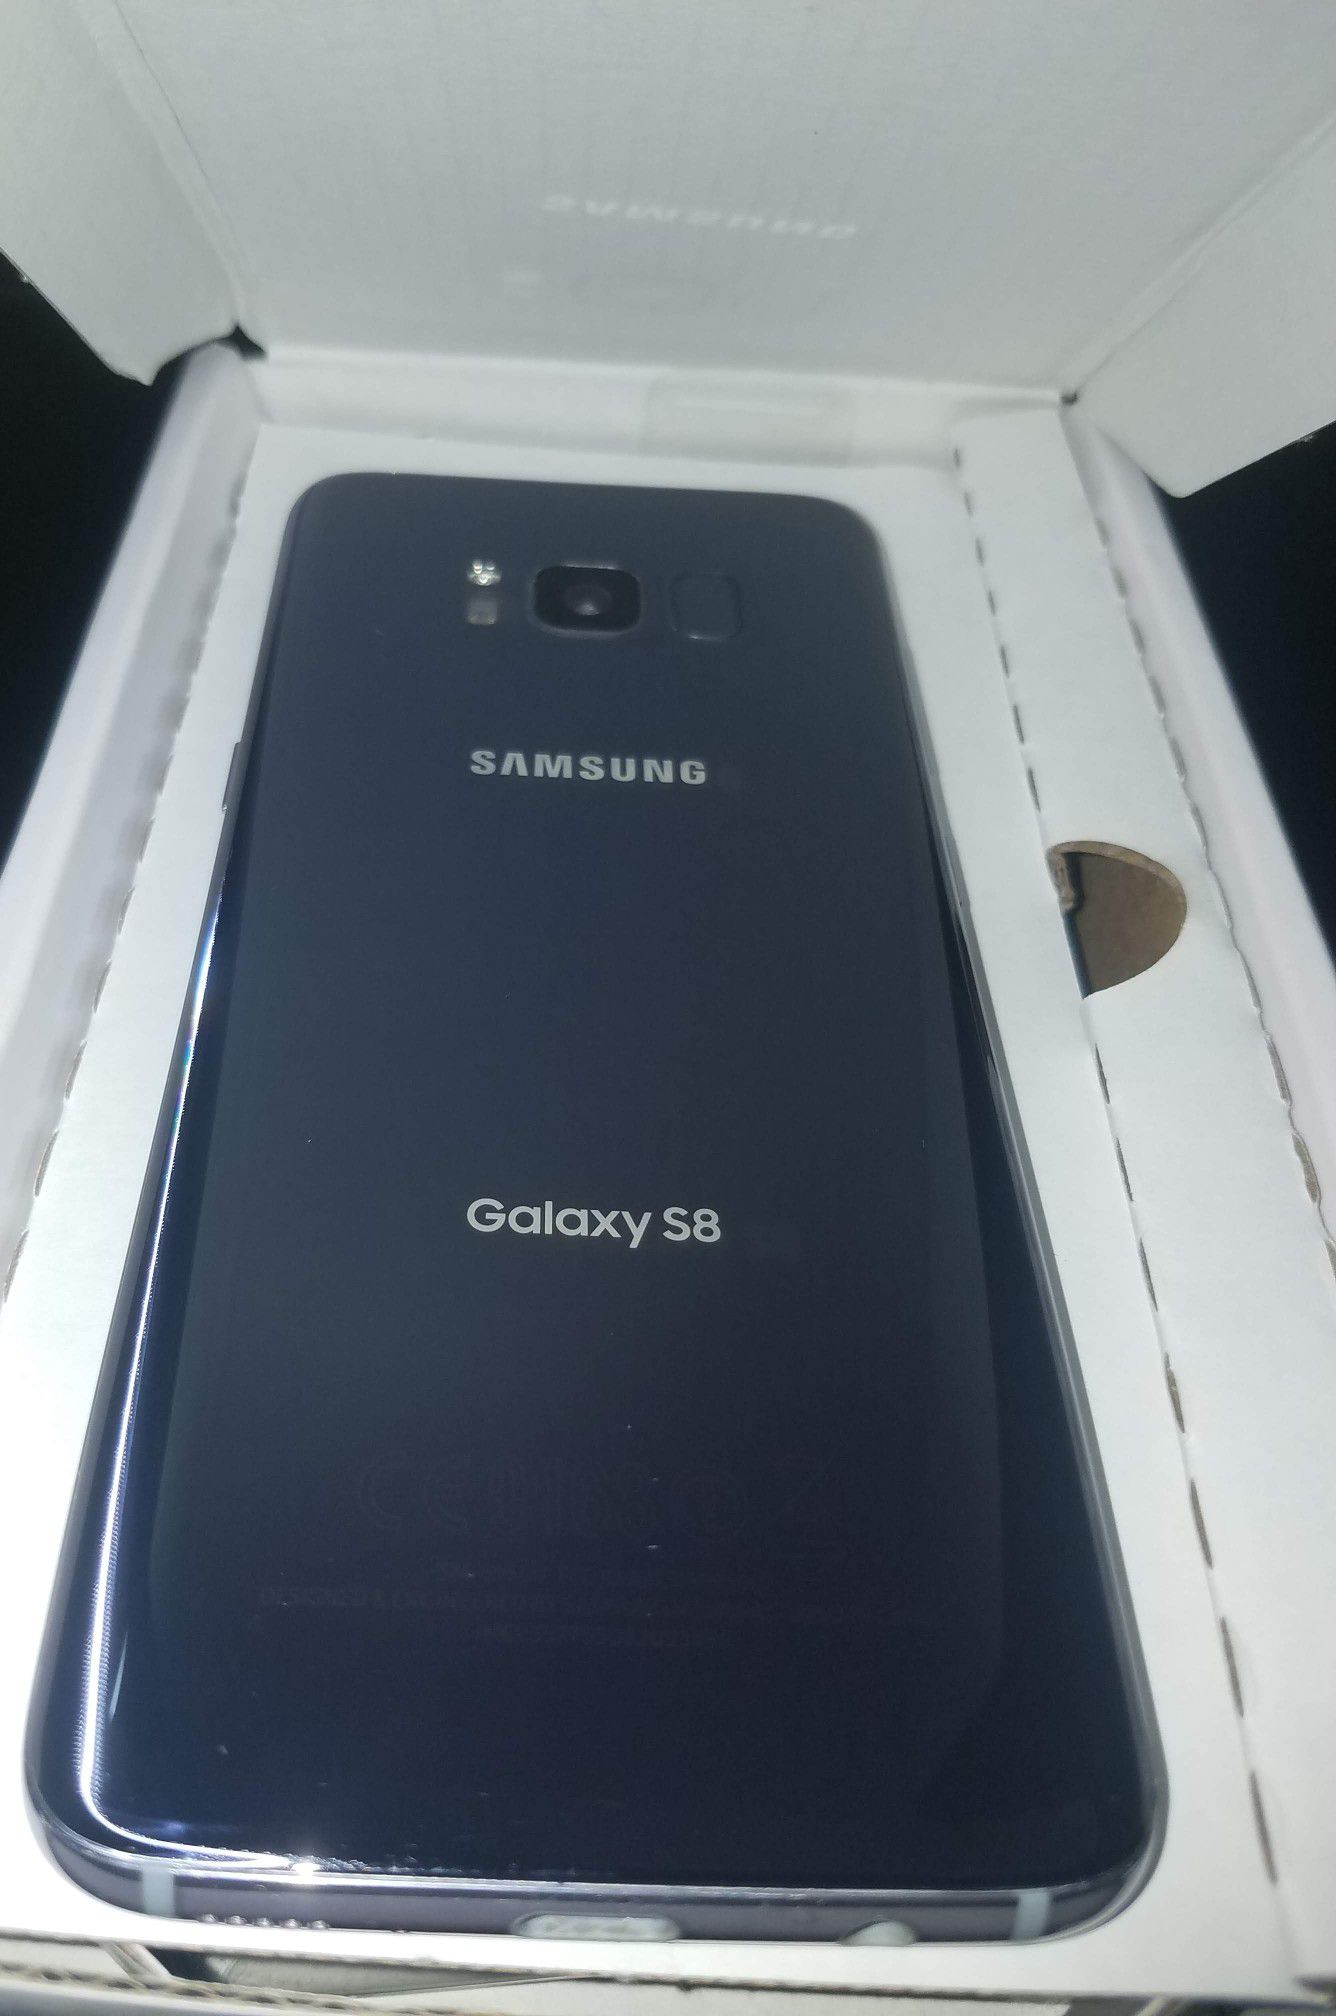 Gray samsung galaxy s8 unlcoked for all carriers. Price it is FIRM not NEGOTIABLE. Phone it is in good condition